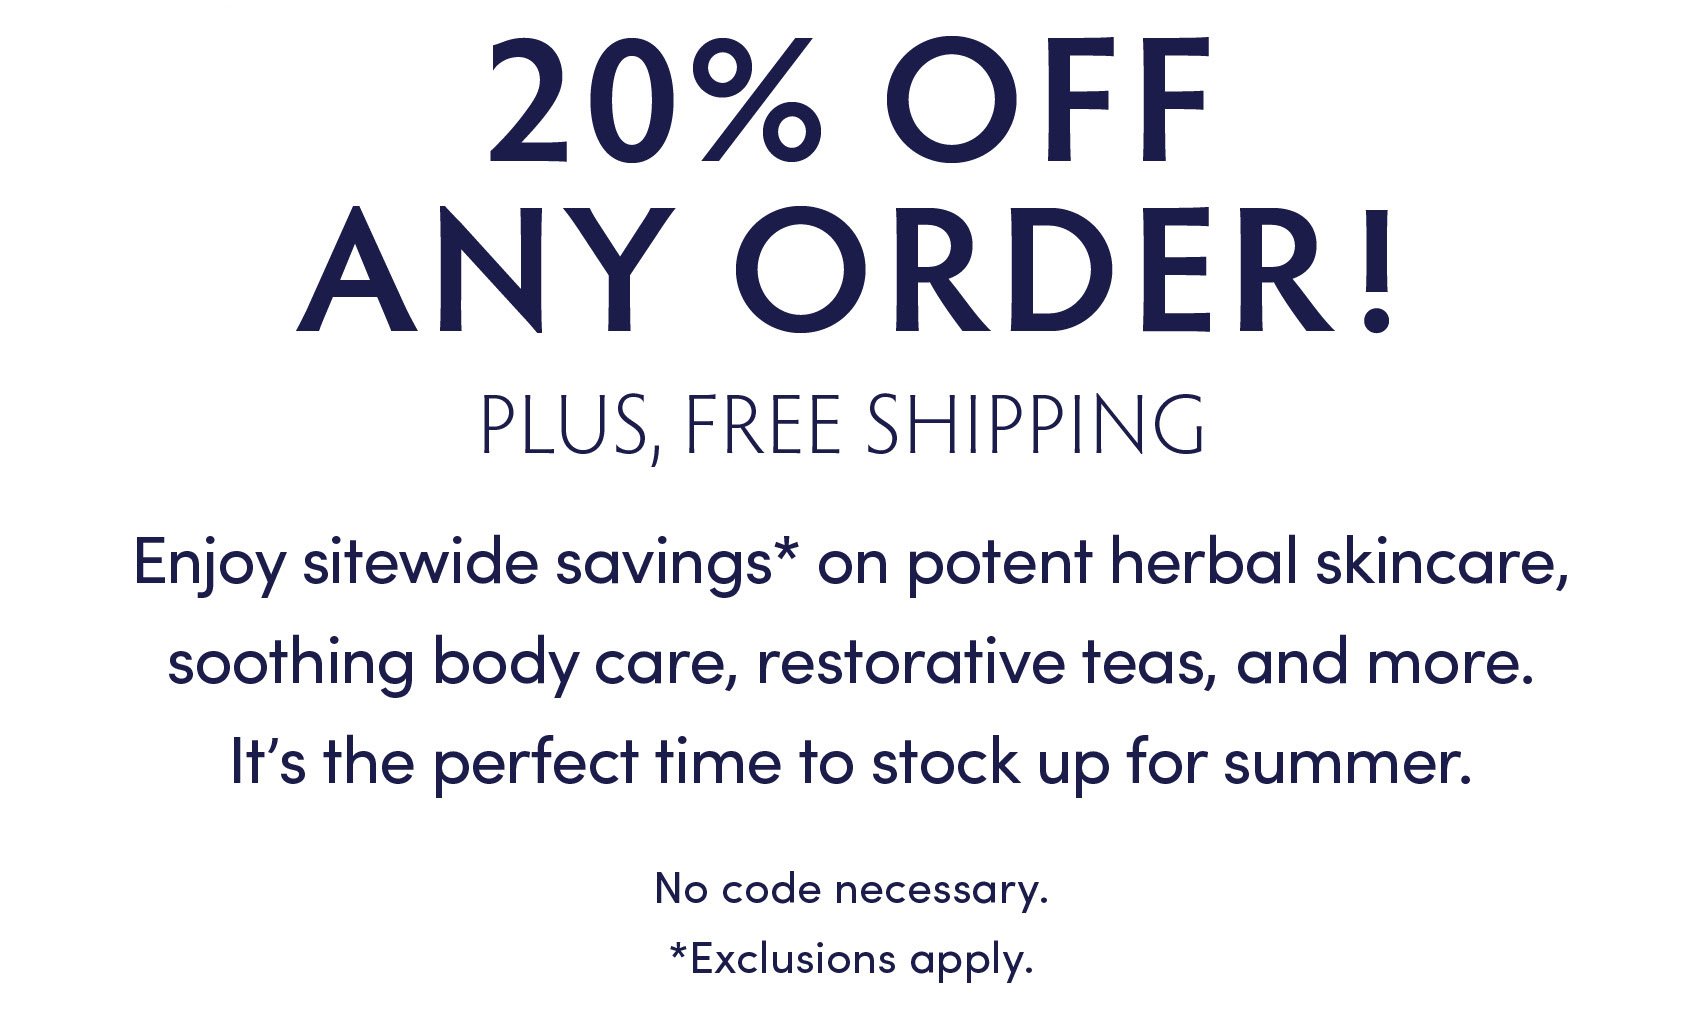 20% OFF ANY ORDER PLUS FREE SHIPPING.